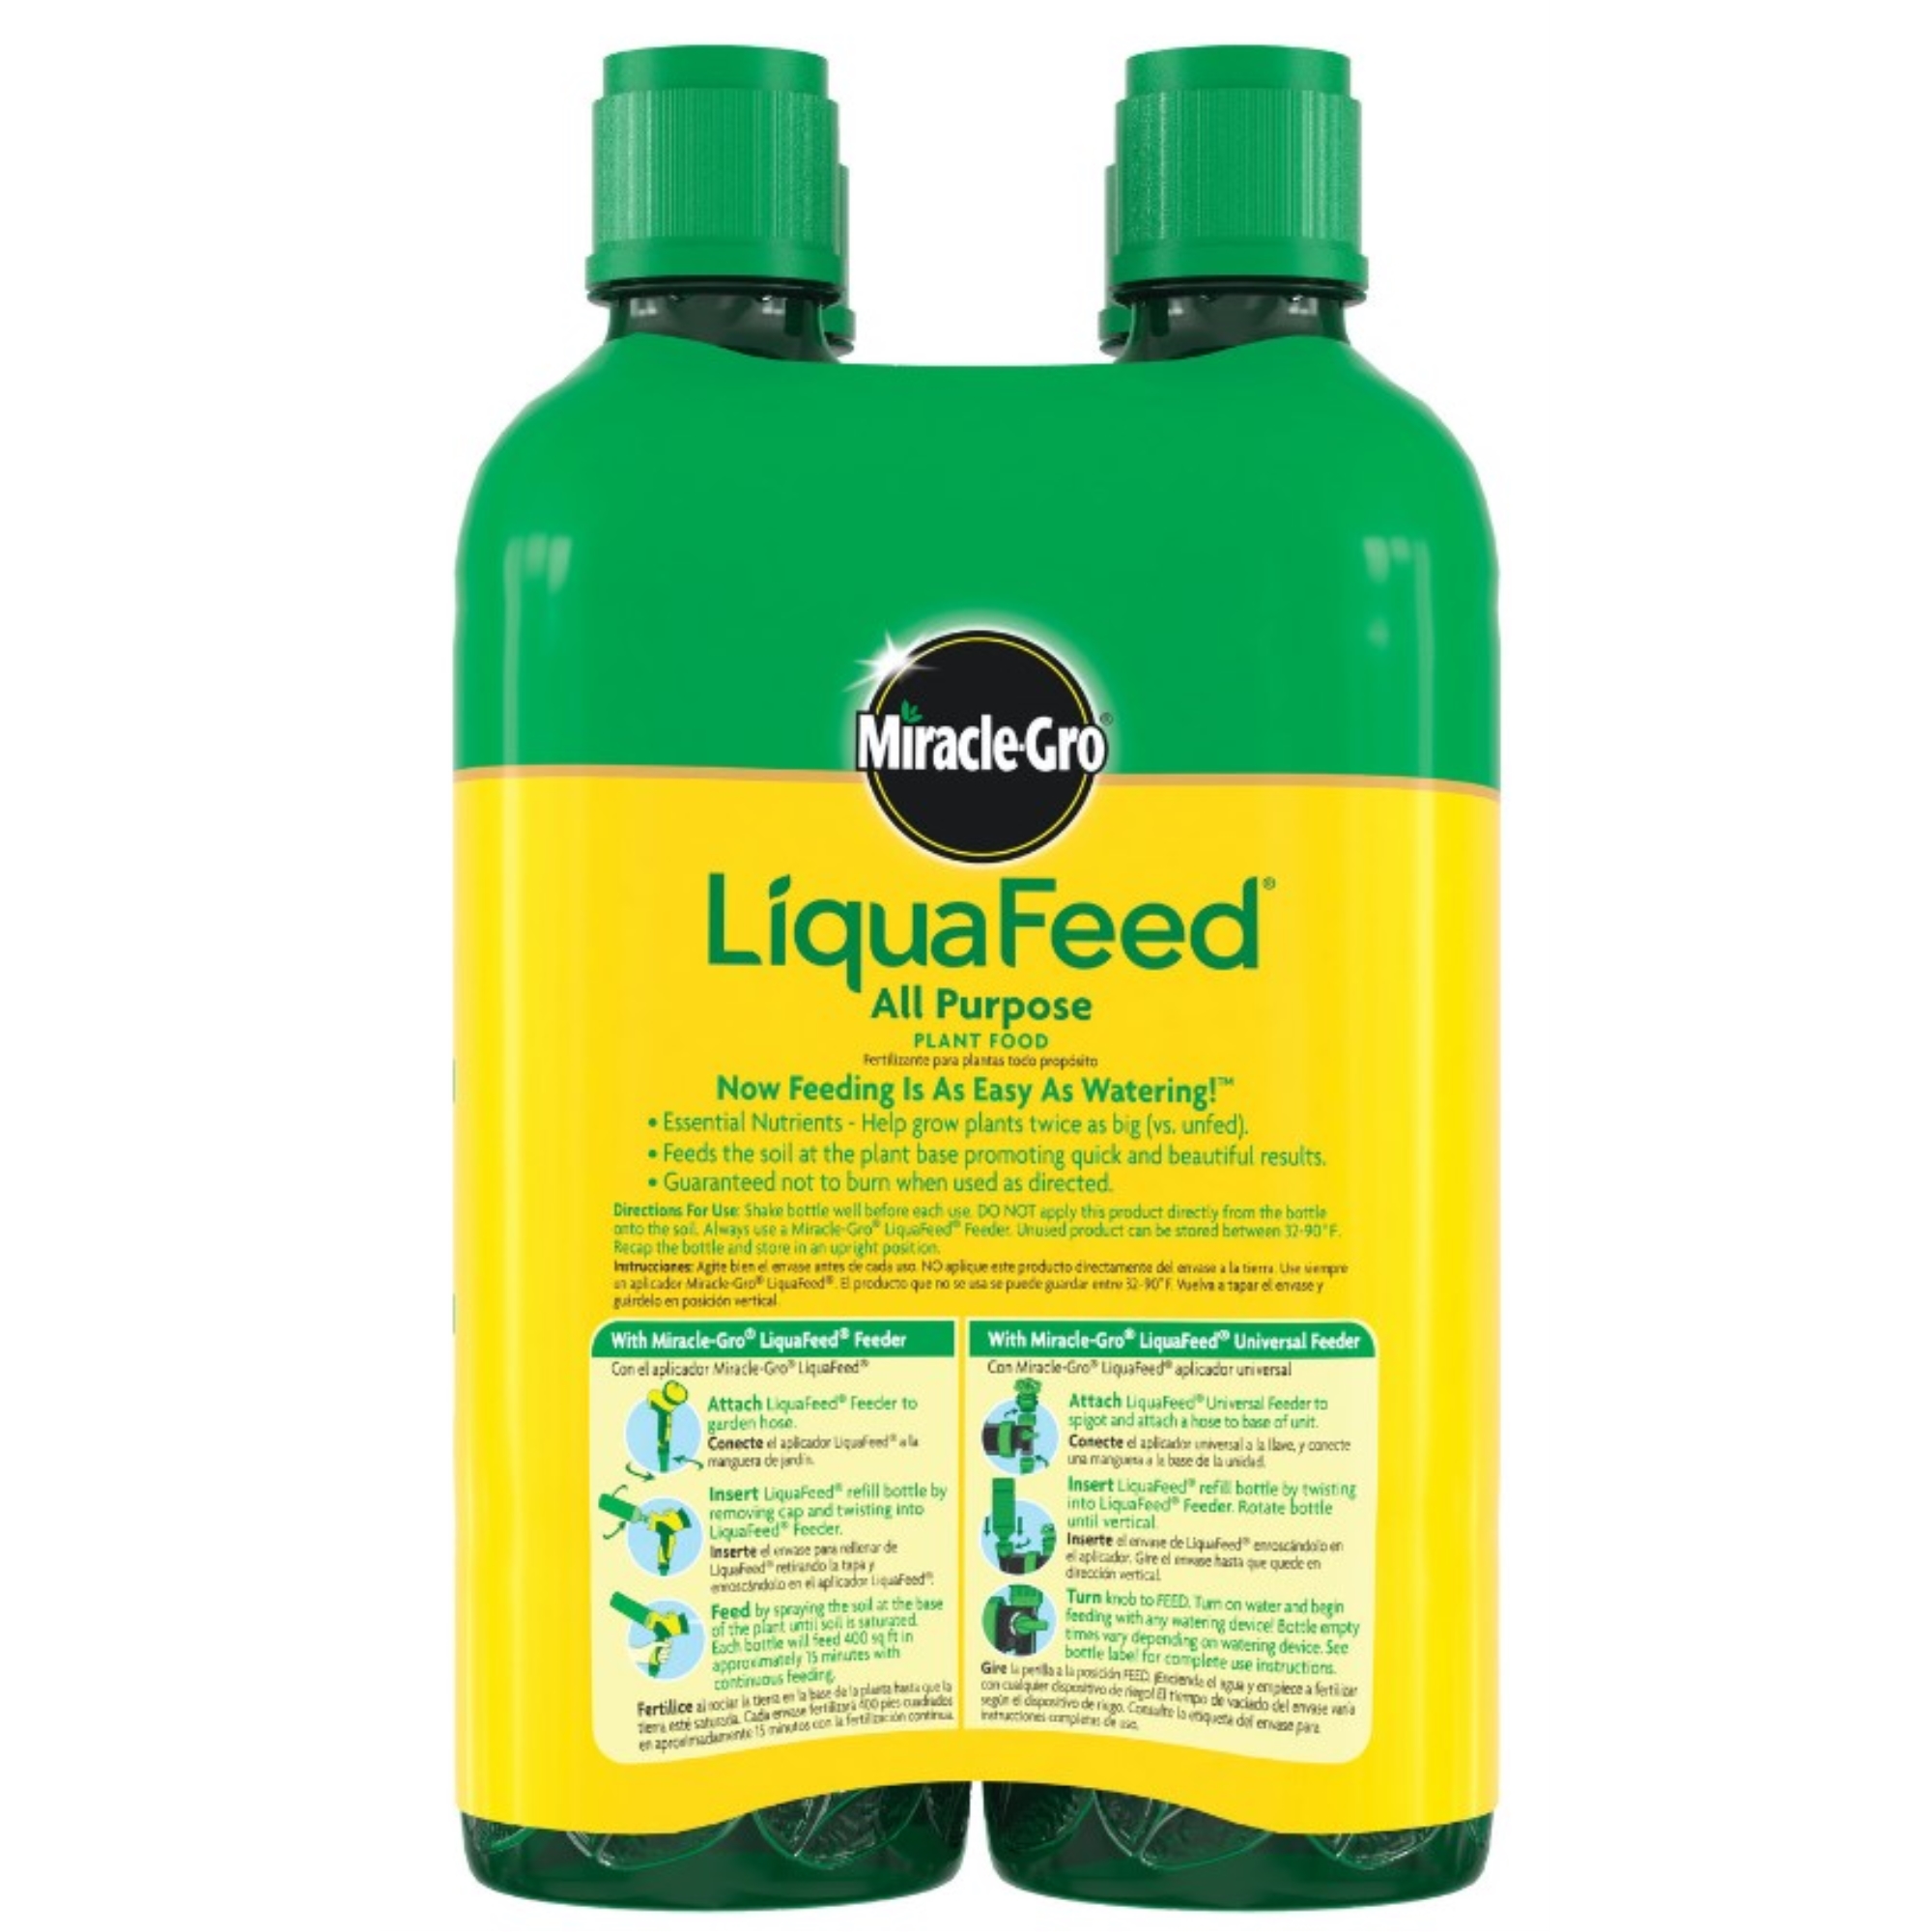 Miracle-Gro Liquafeed All Purpose Plant Food, 4-Pack Refills, 16 fl. oz. - image 4 of 9